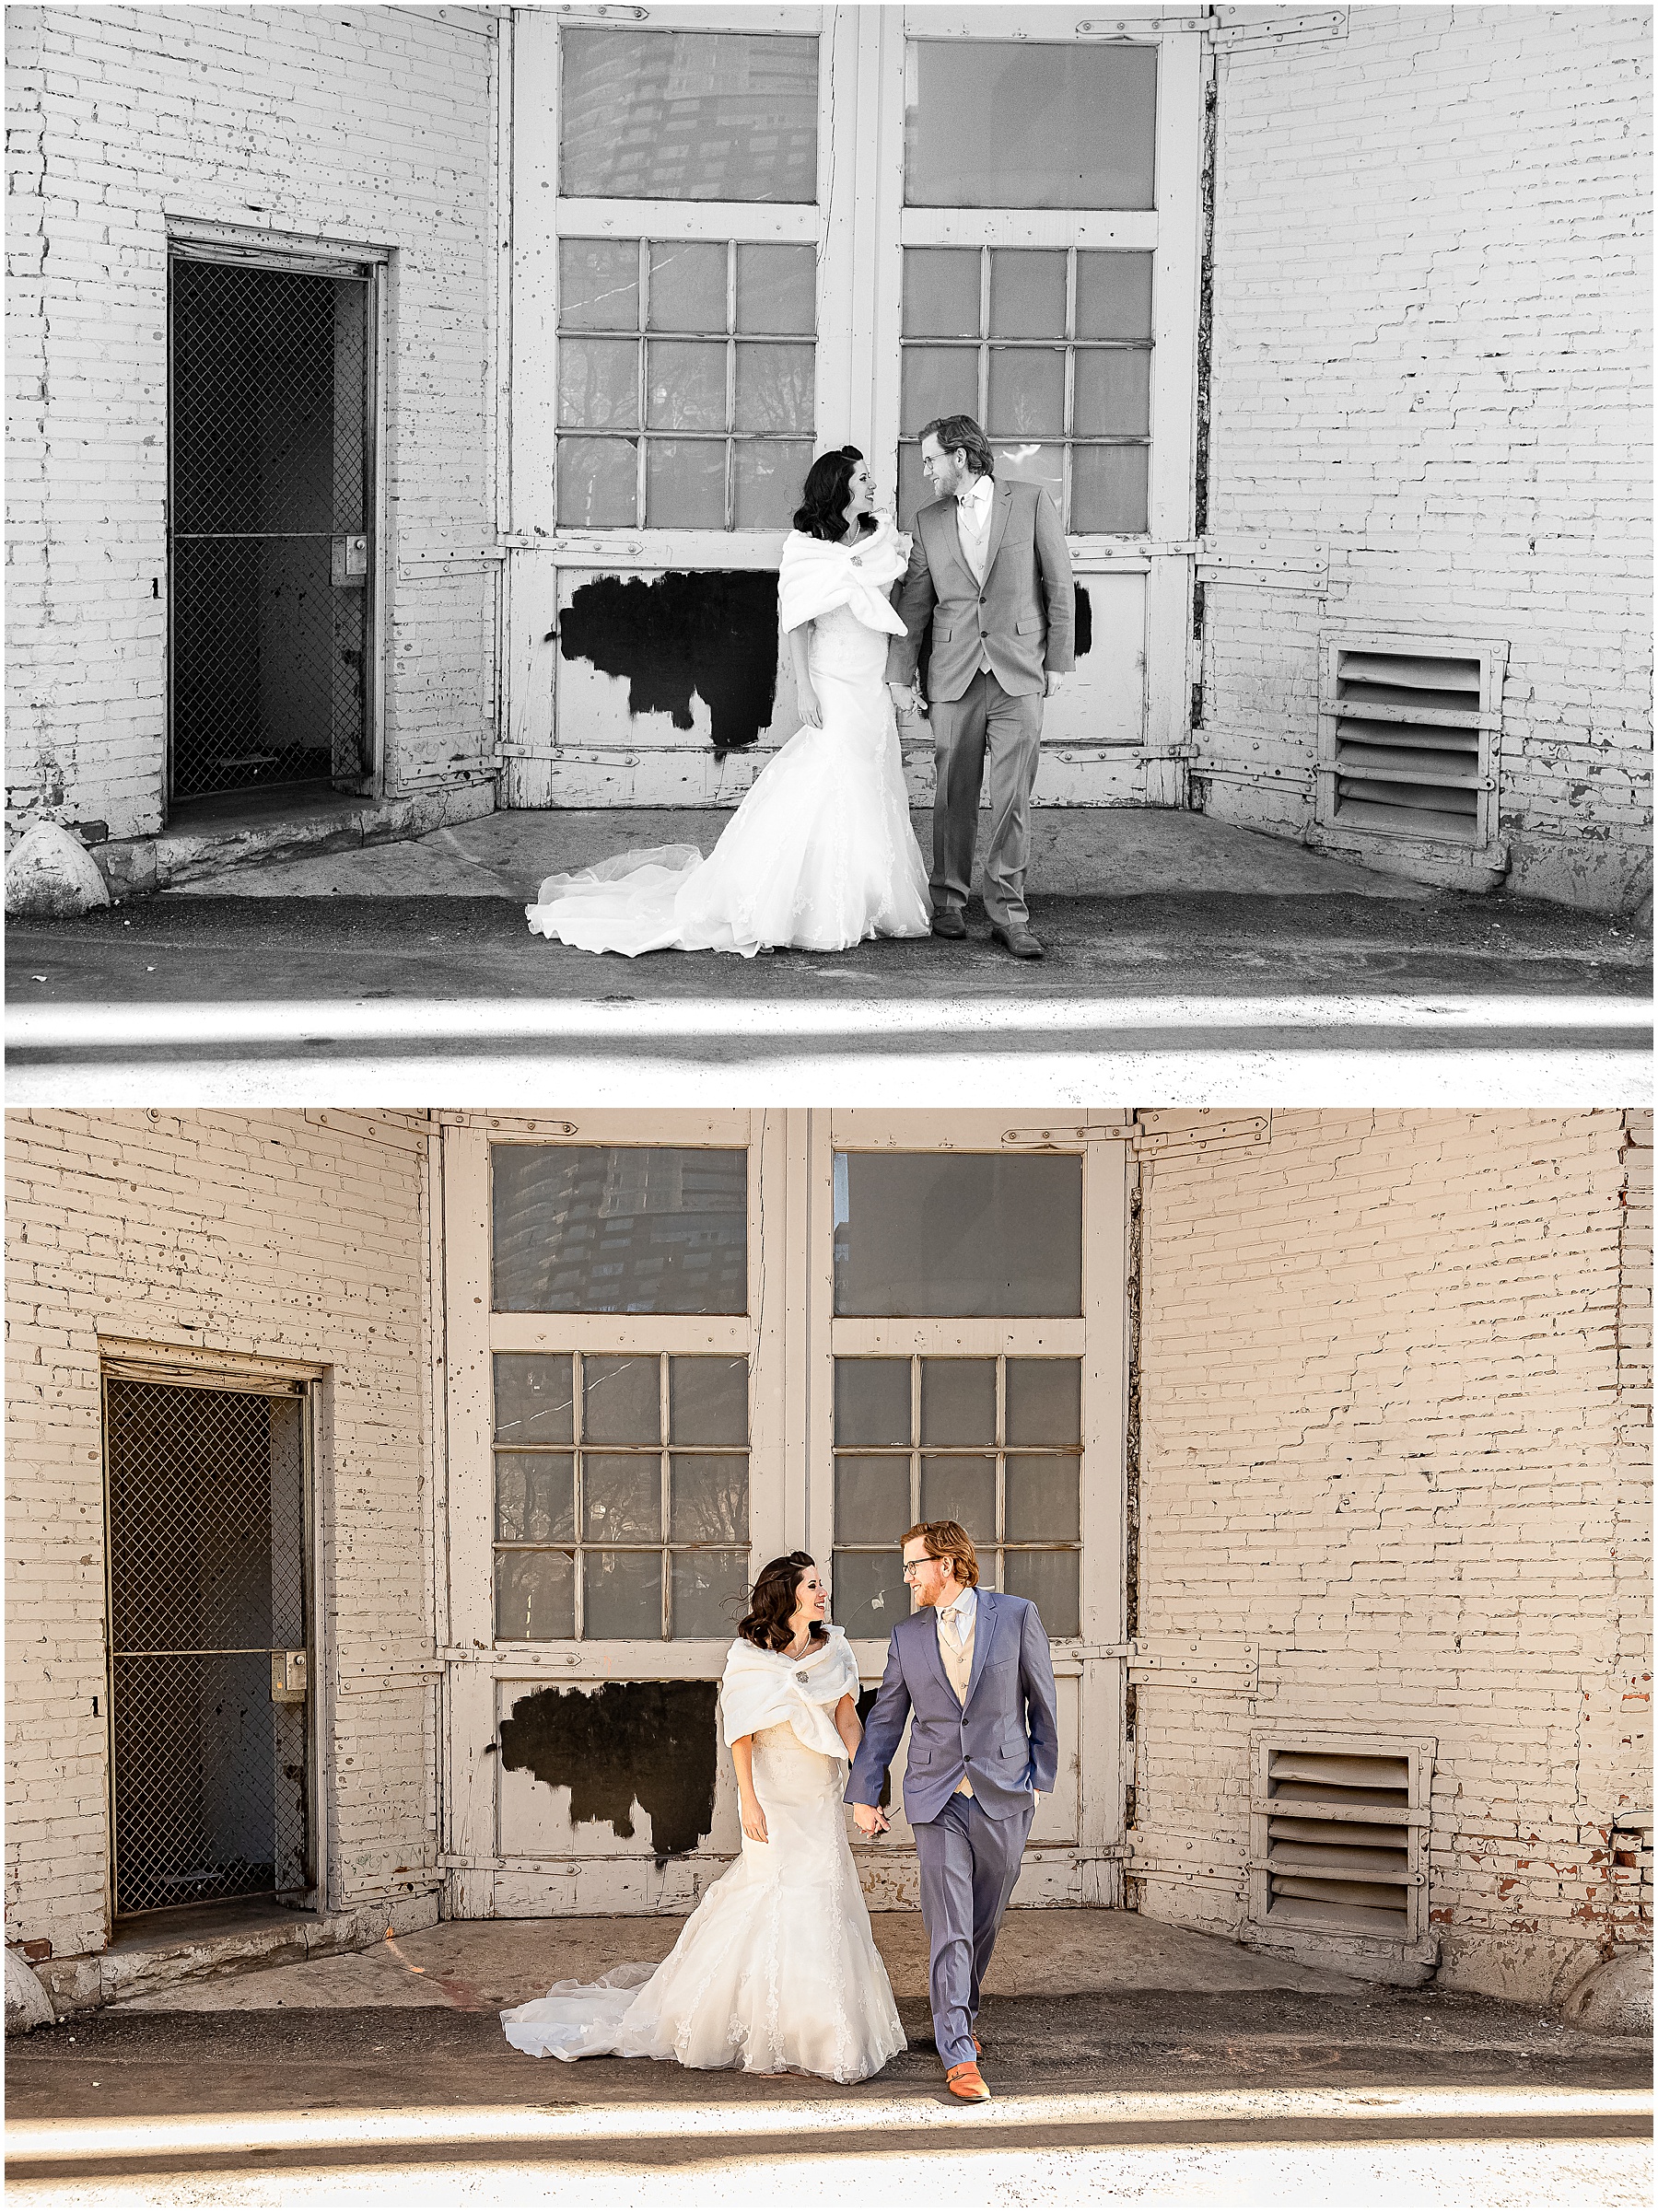 Colorado Elopement, Denver-Colorado Elopement Photographer, wedding photos, wedding details, bridal jewelry, wedding day, broach, diamonds, micro wedding, wedding photographer, wedding inspiration, backyard wedding, vows, winter wedding, city wedding, destination wedding, wedding photographer, bride, wedding dress, groom, the first look, top Colorado wedding photographer, perfect Colorado wedding, zoom wedding, downtown Denver, bridal portraits, wedding dress, bride and groom, husband and wife, twin flame